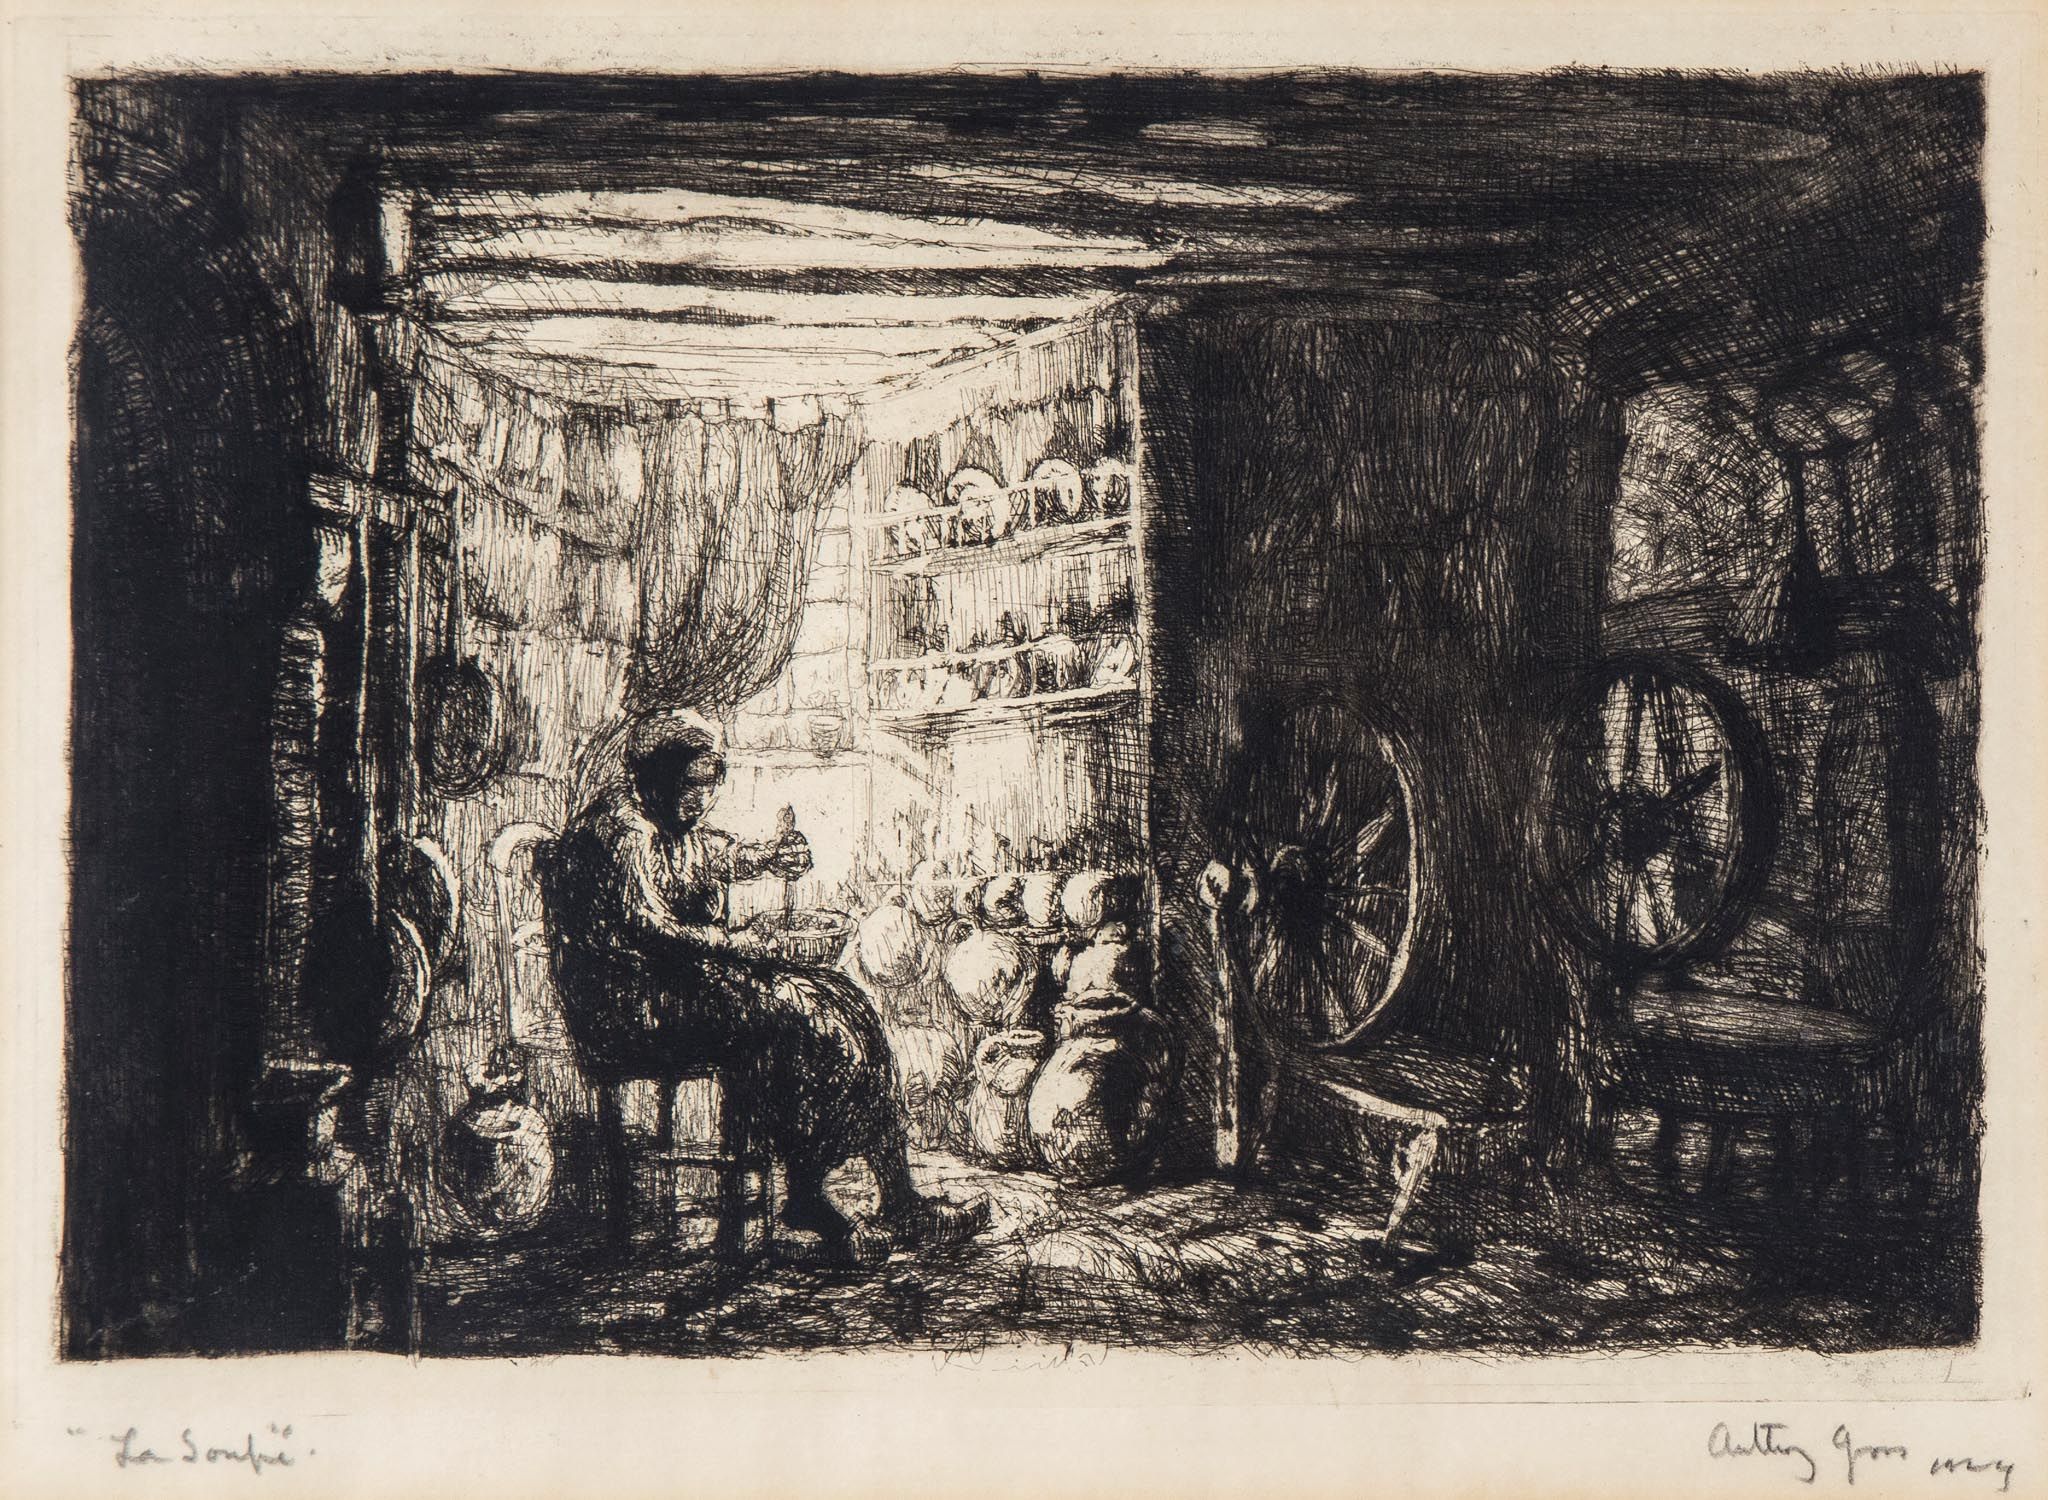 Anthony Gross (1905-1984) - La Soupe etching with aquatint, a fine, richly inked impression, 1924,